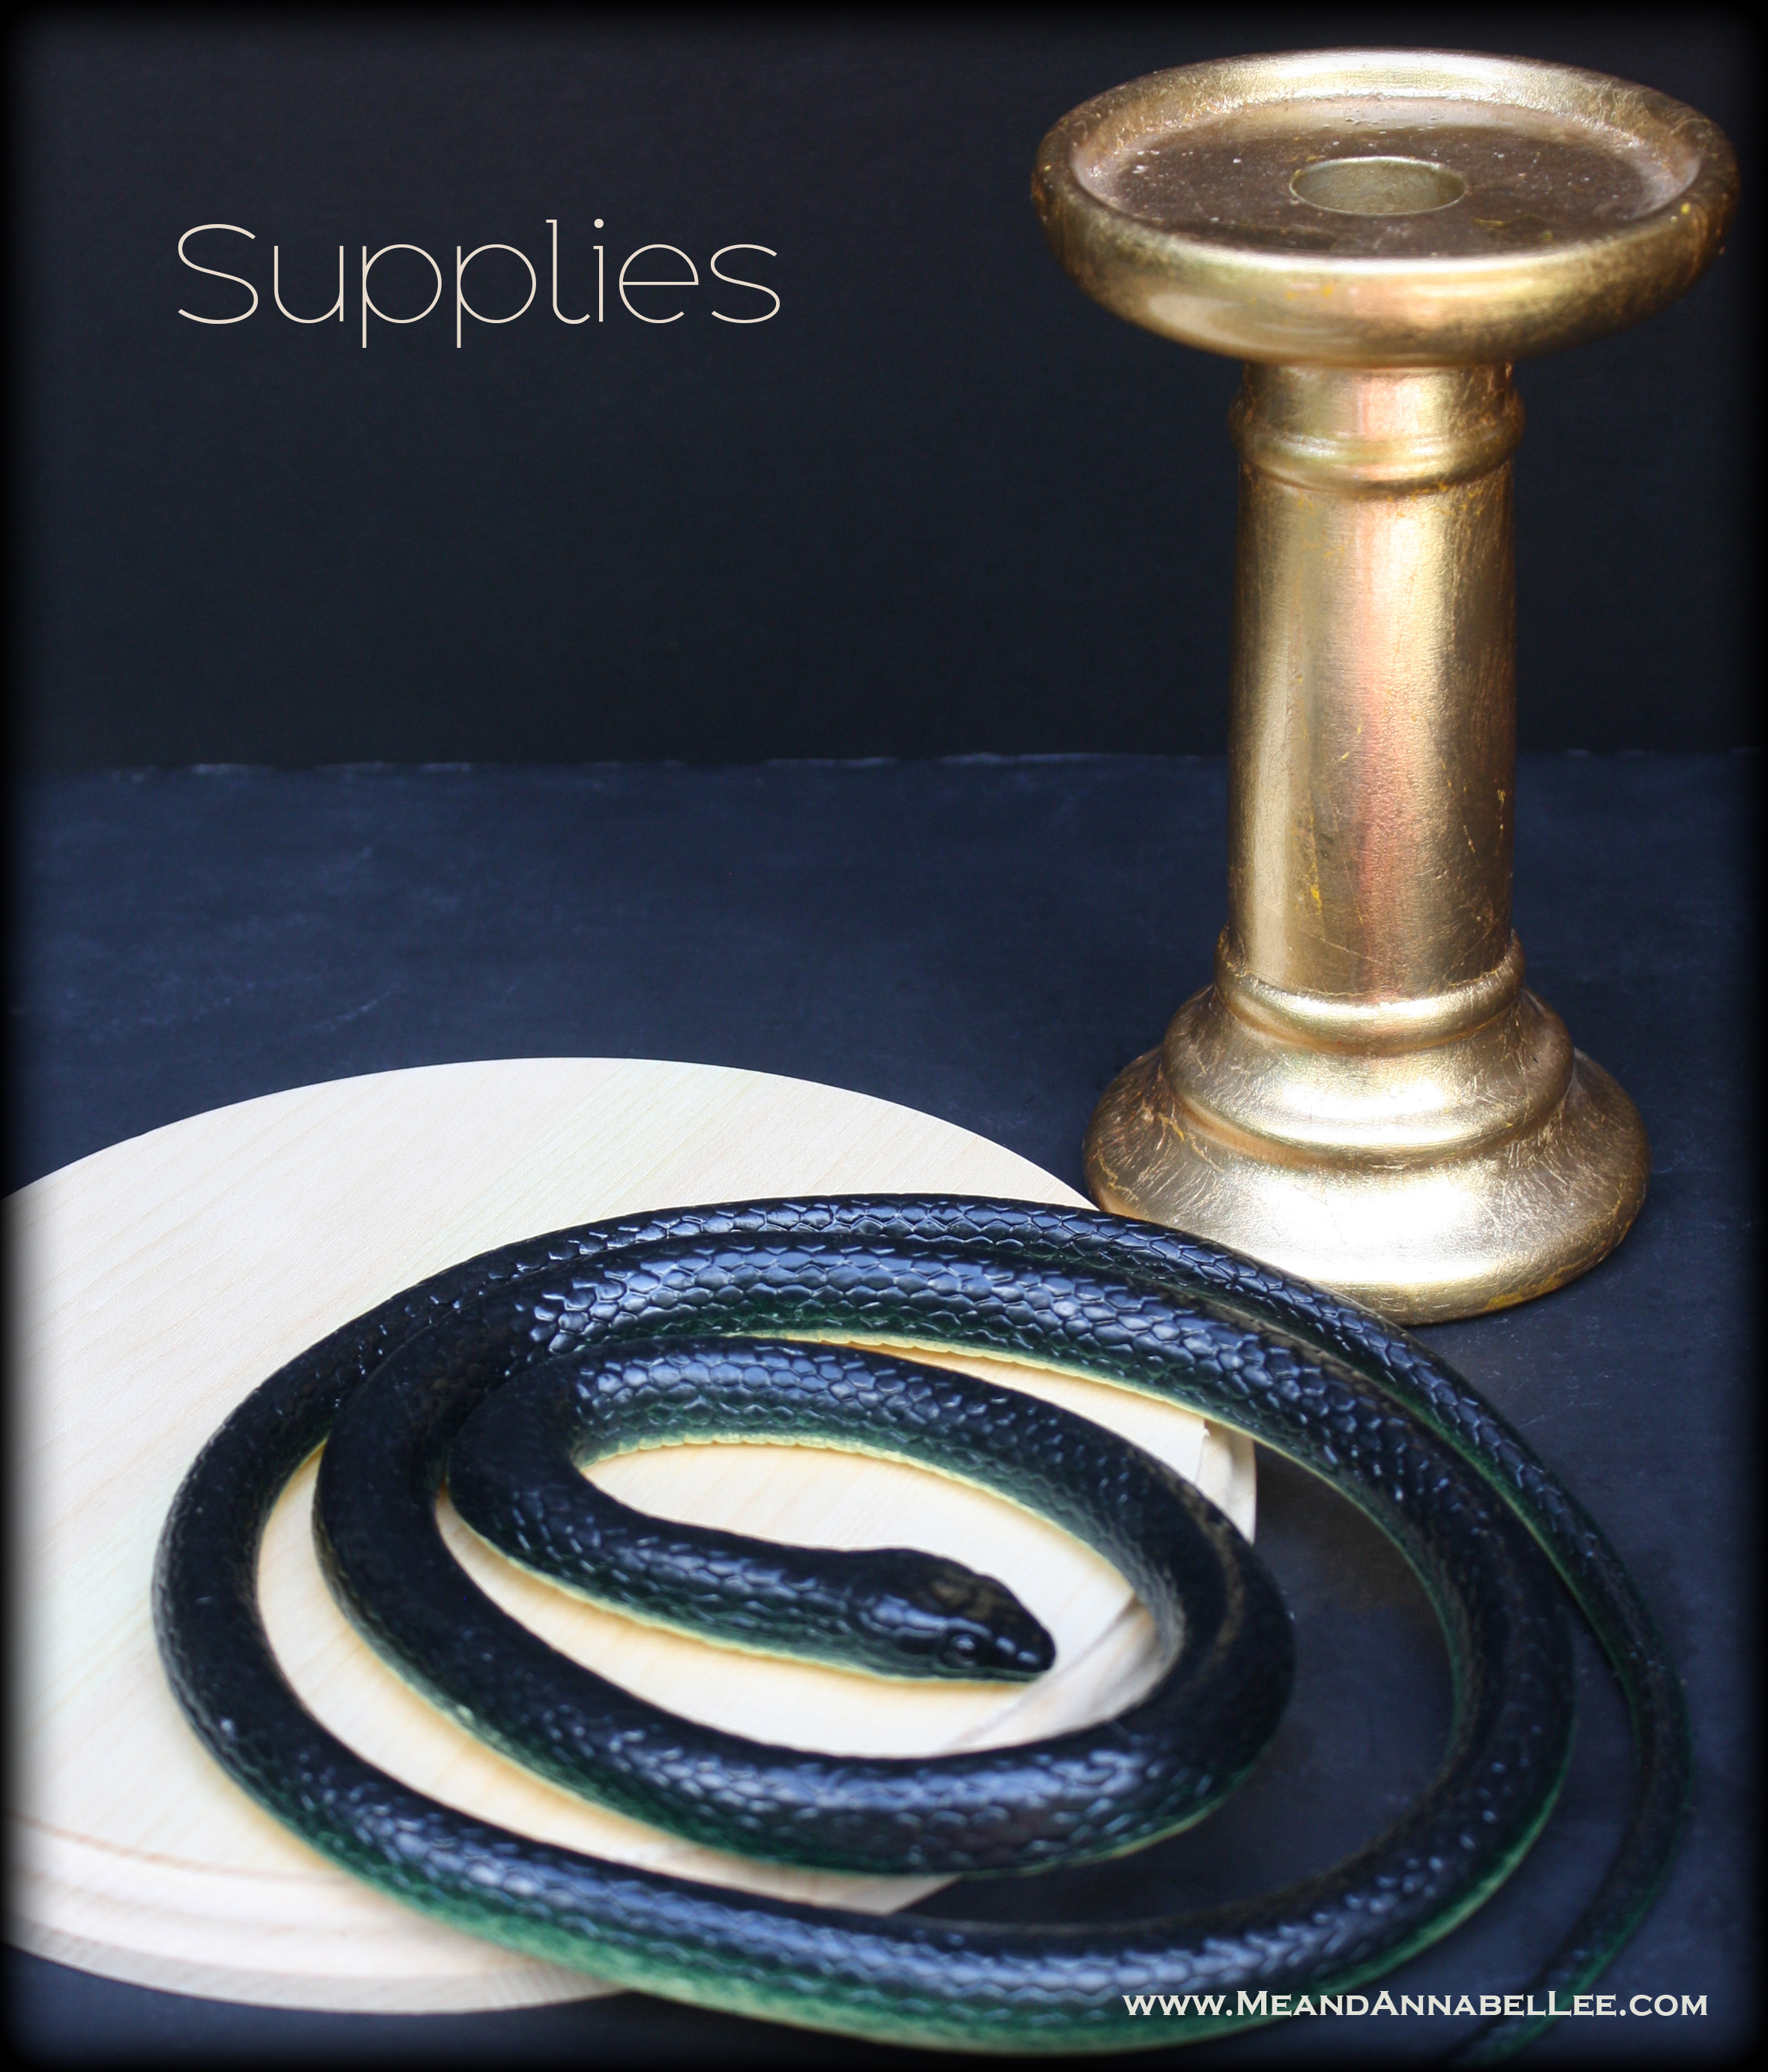 How to make a Snake Cake Stand - Supply List | Halloween Crafts | www.MeandAnnabelLee.com